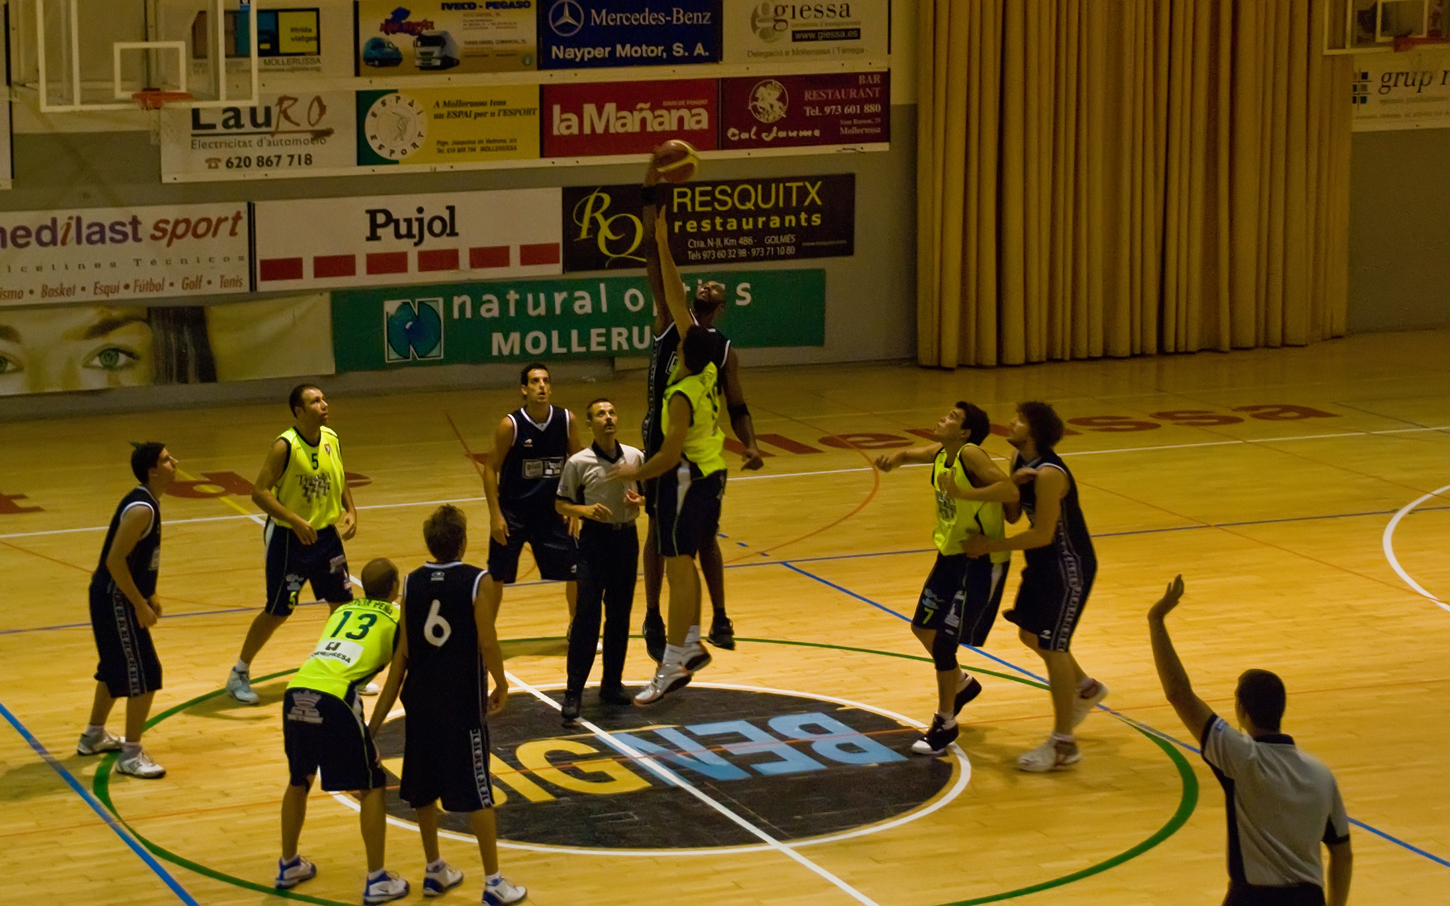 the players and referee on a basketball court